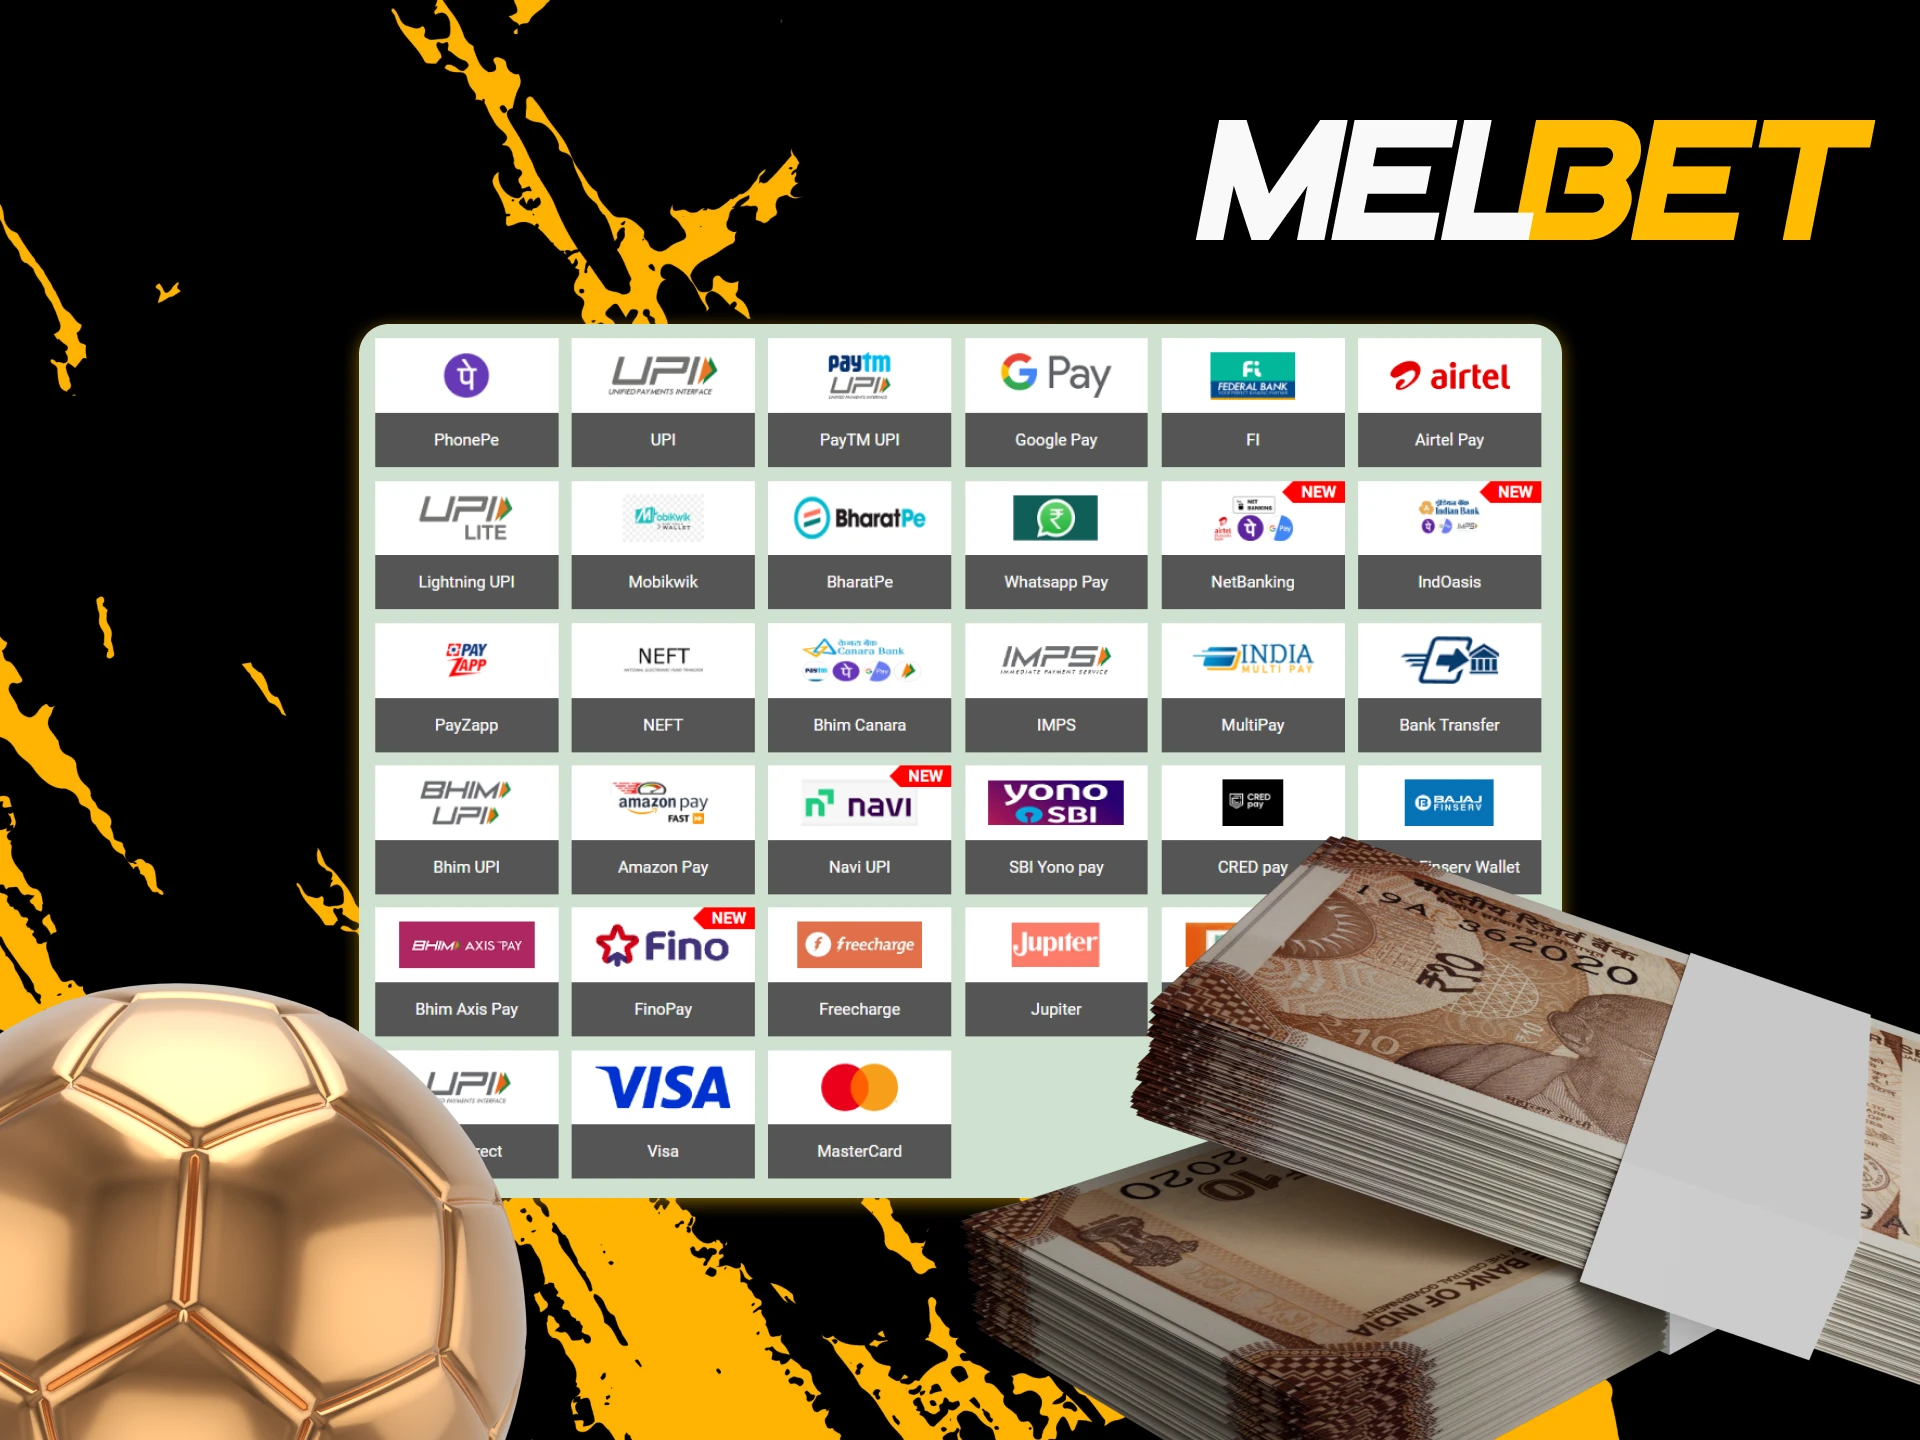 At Melbet you can deposit and withdraw money using these methods.